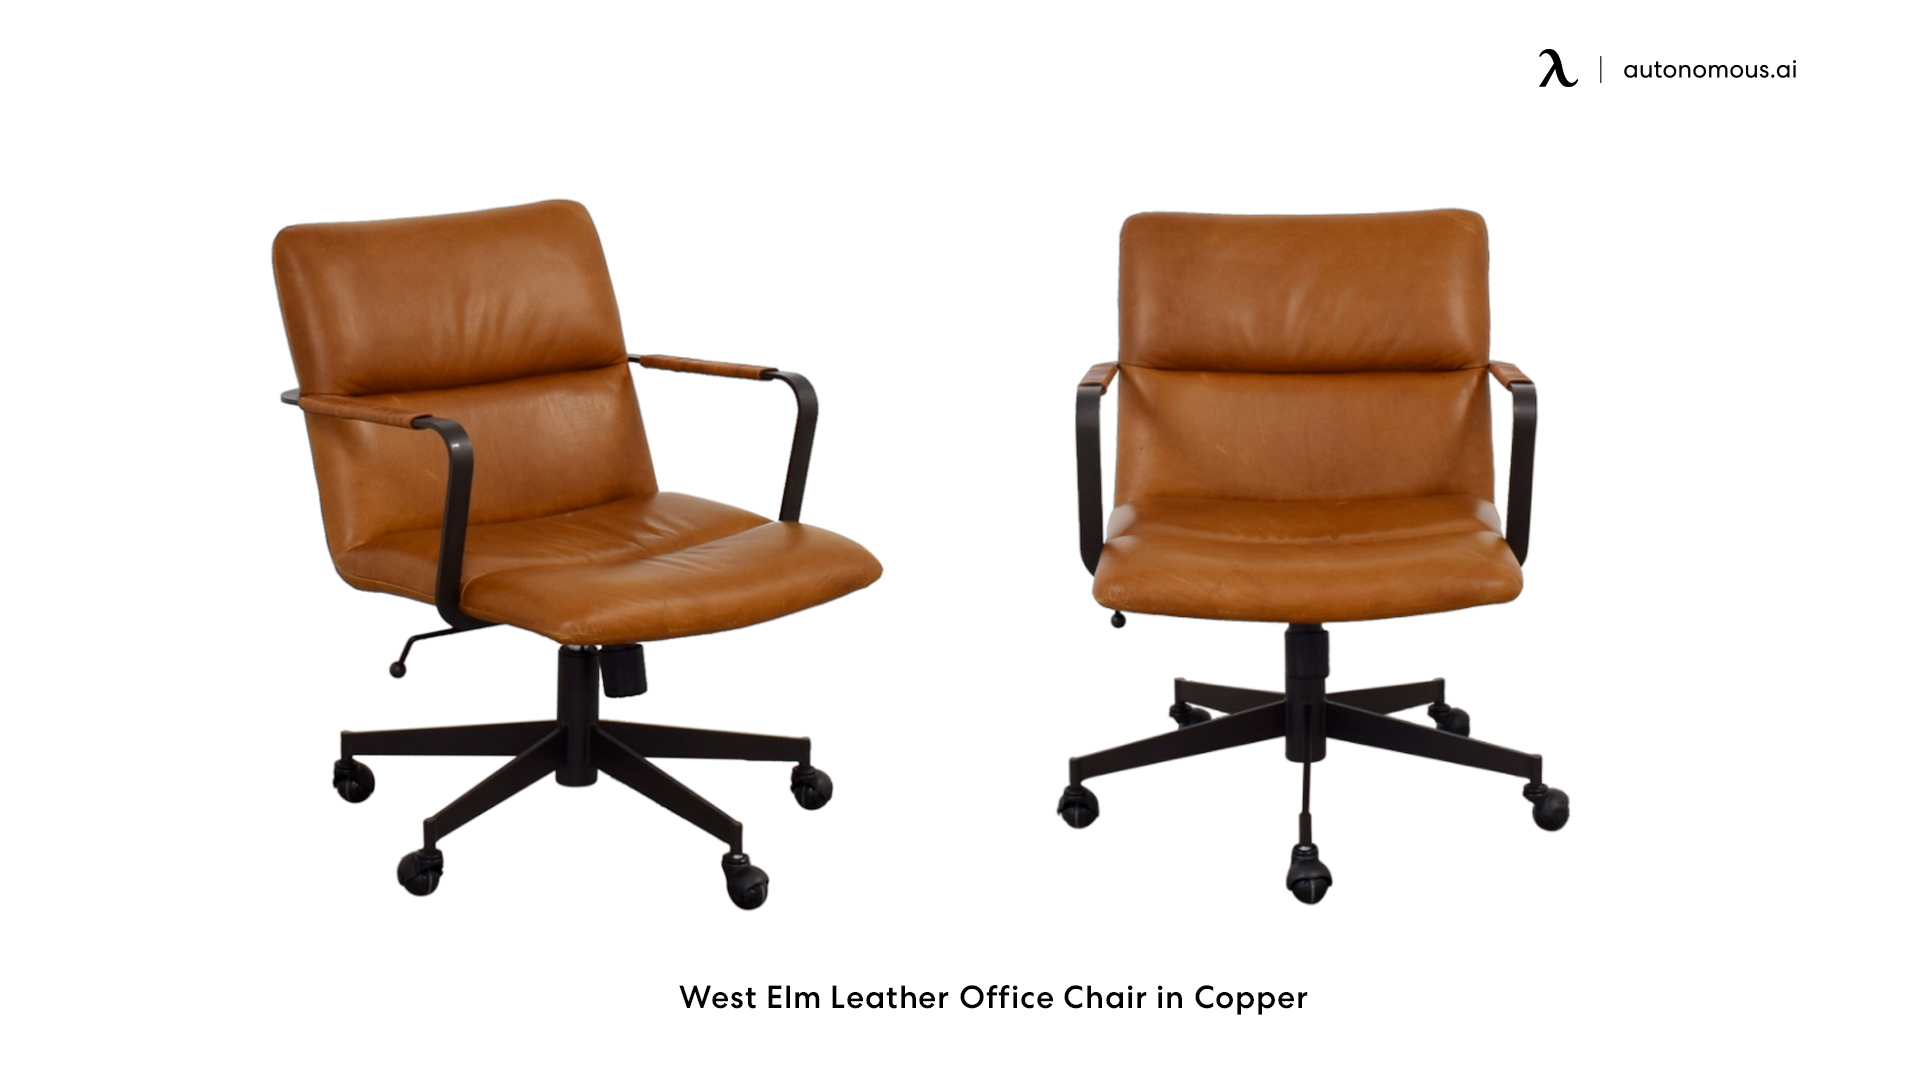 West Elm Leather Office Chair in Copper